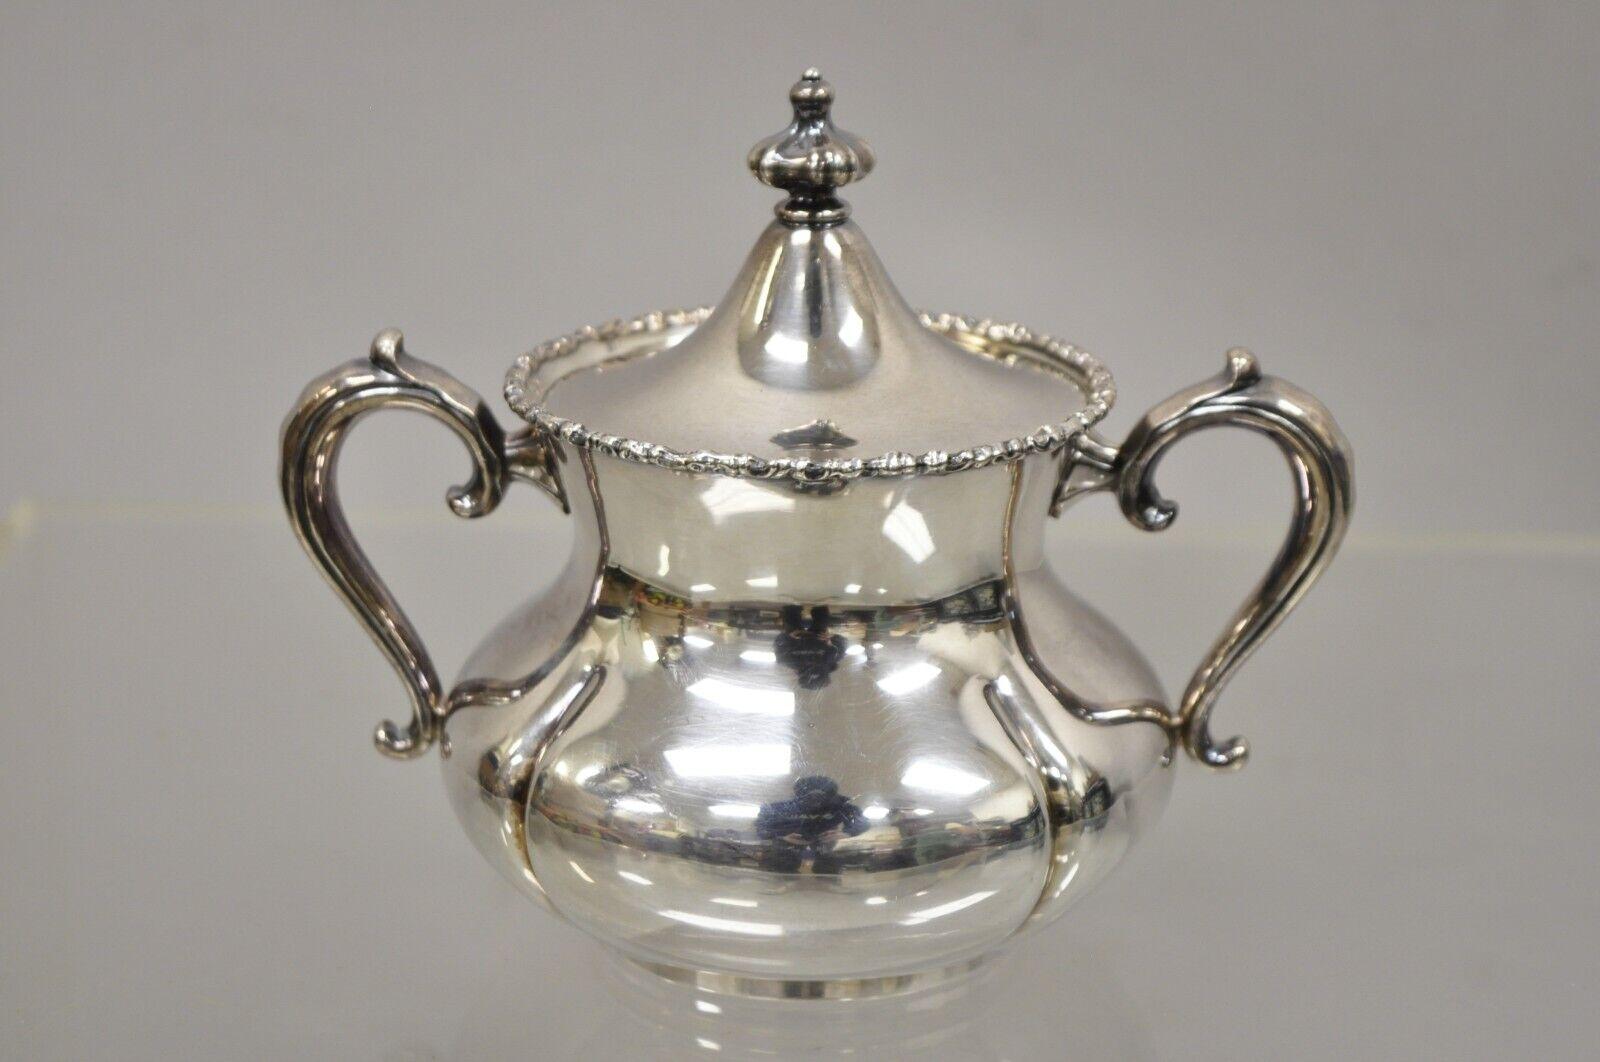 Antique Victorian silver plated tea set with english platter tray - 6 pc set. Item features (1) Coffee pot, (1) tea pot, (1) lidded sugar bowl, (1) other bowl, (1) creamer without lid. Serving pieces by American Silver Plate Co. Tray is marked on